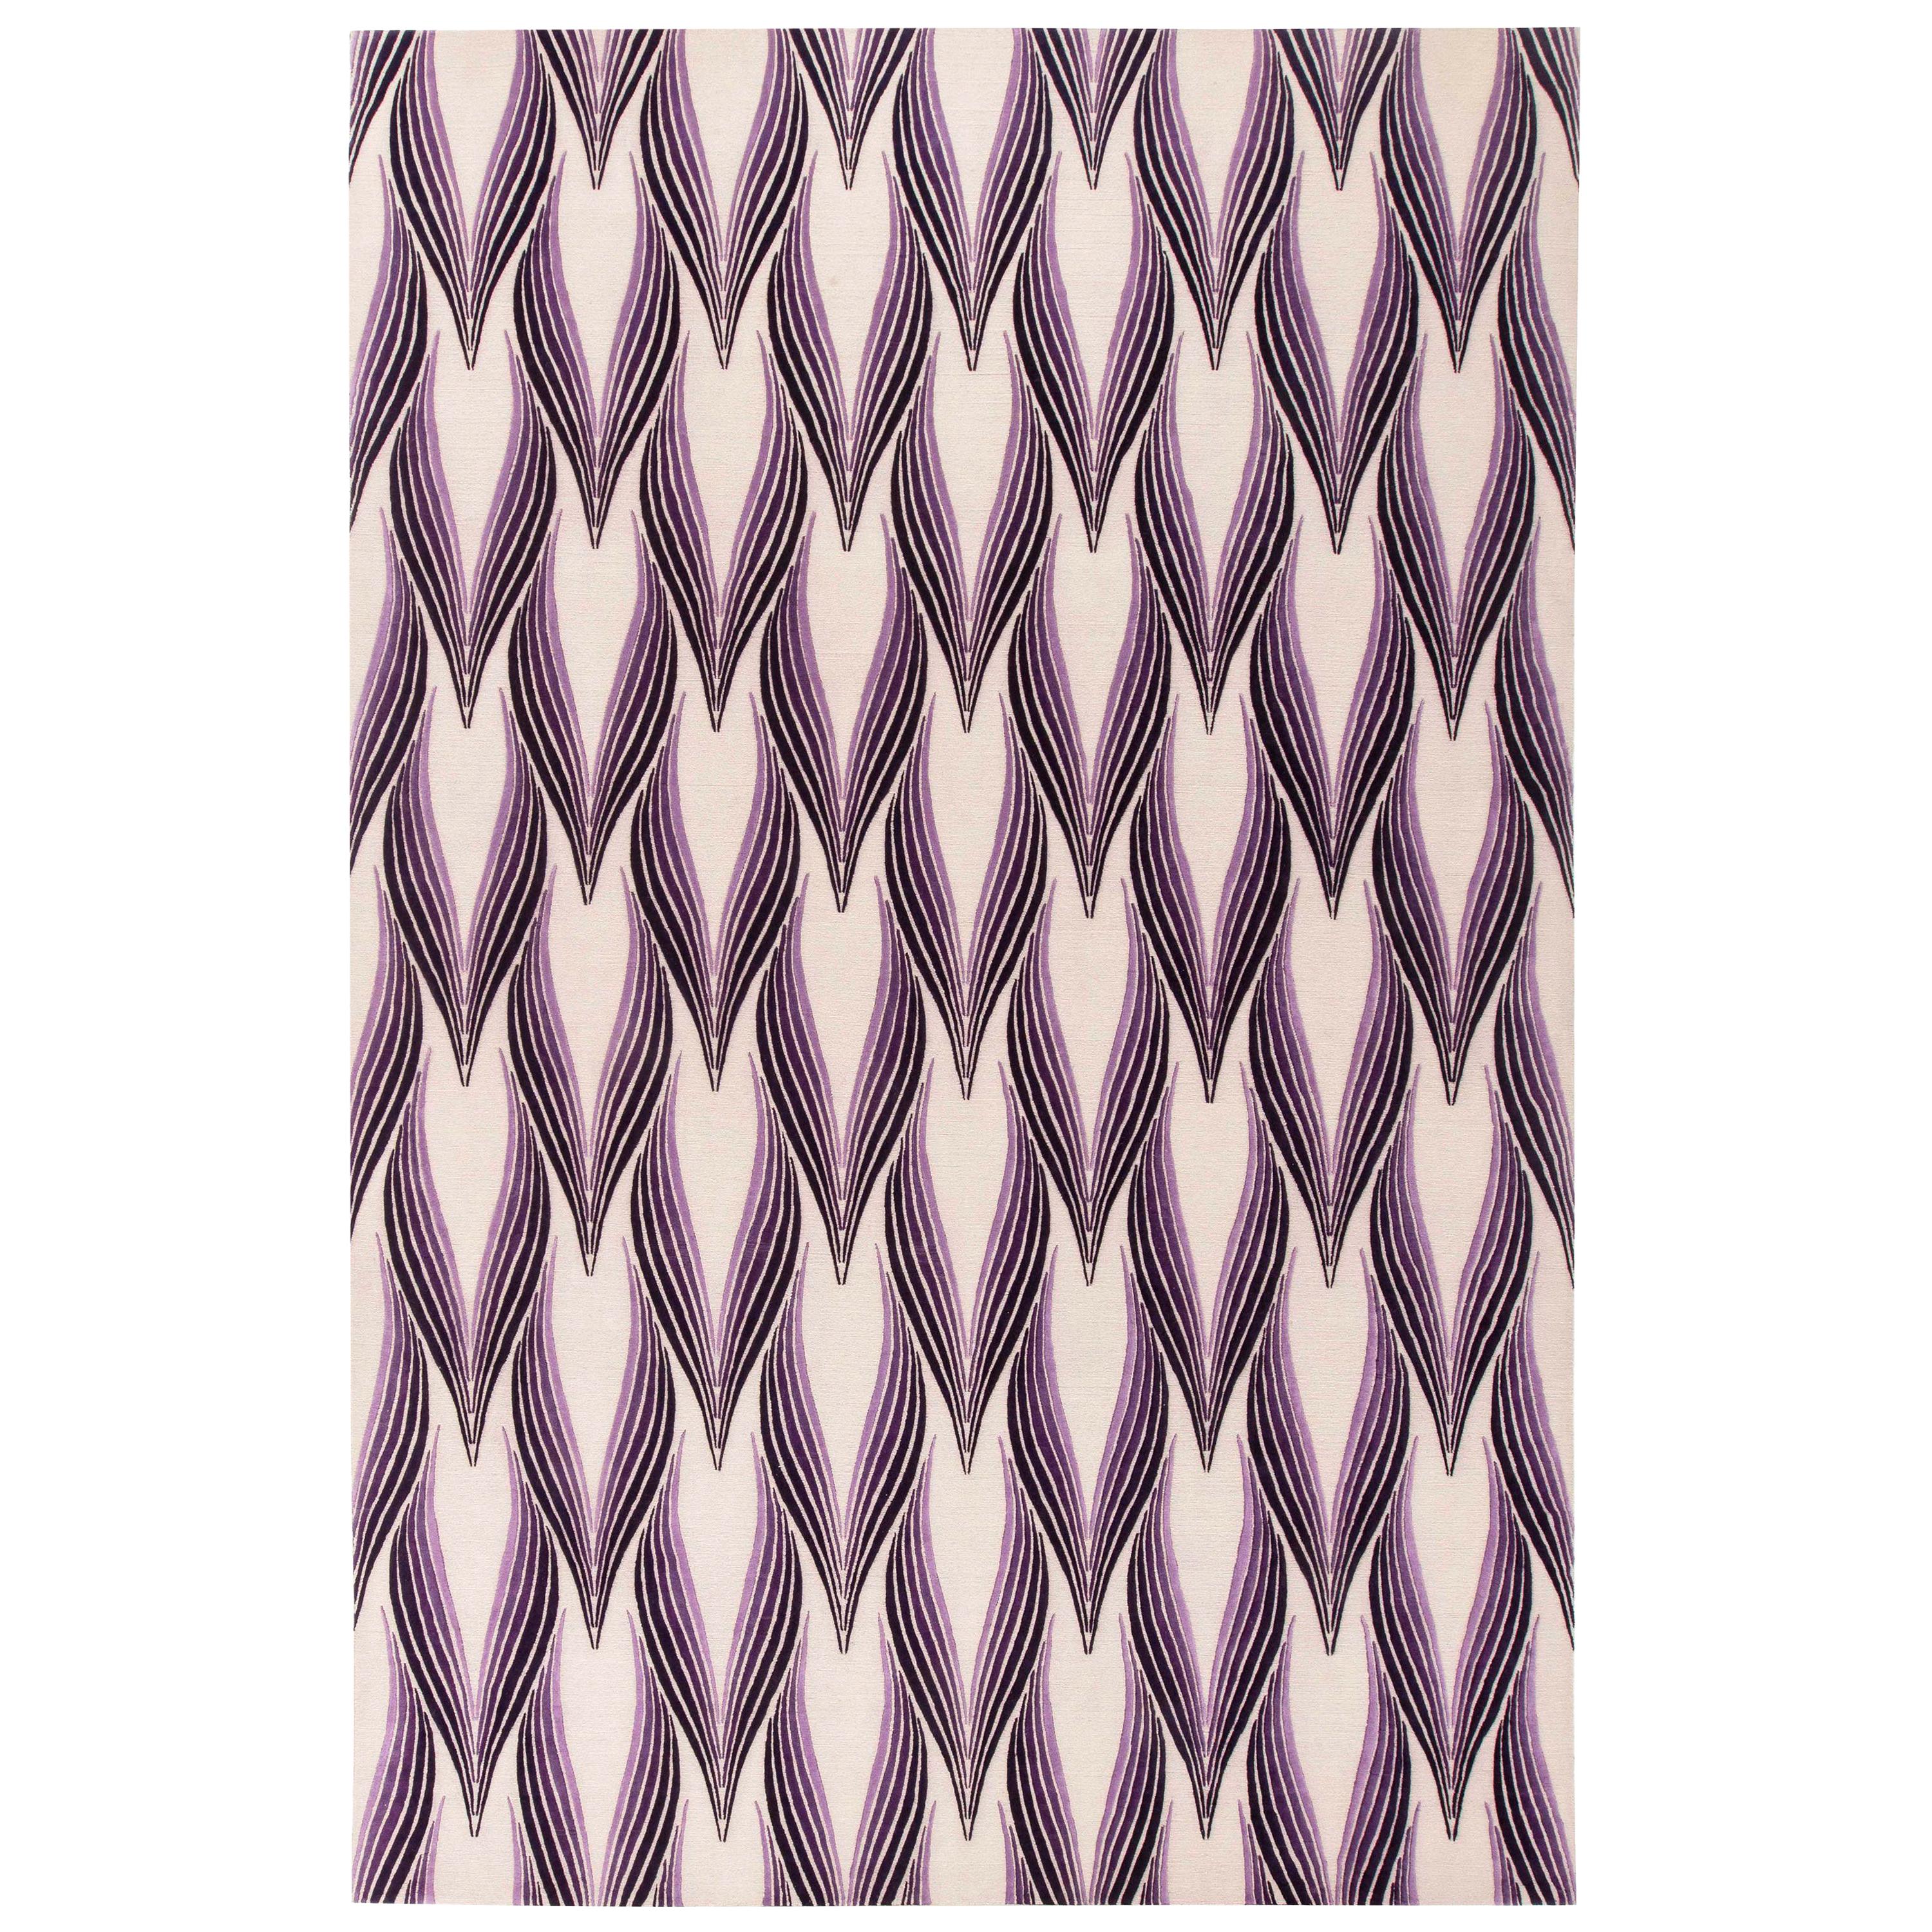 Contemporary Art Deco Inspired Tibetan Rug in Gray, Violet, and Black